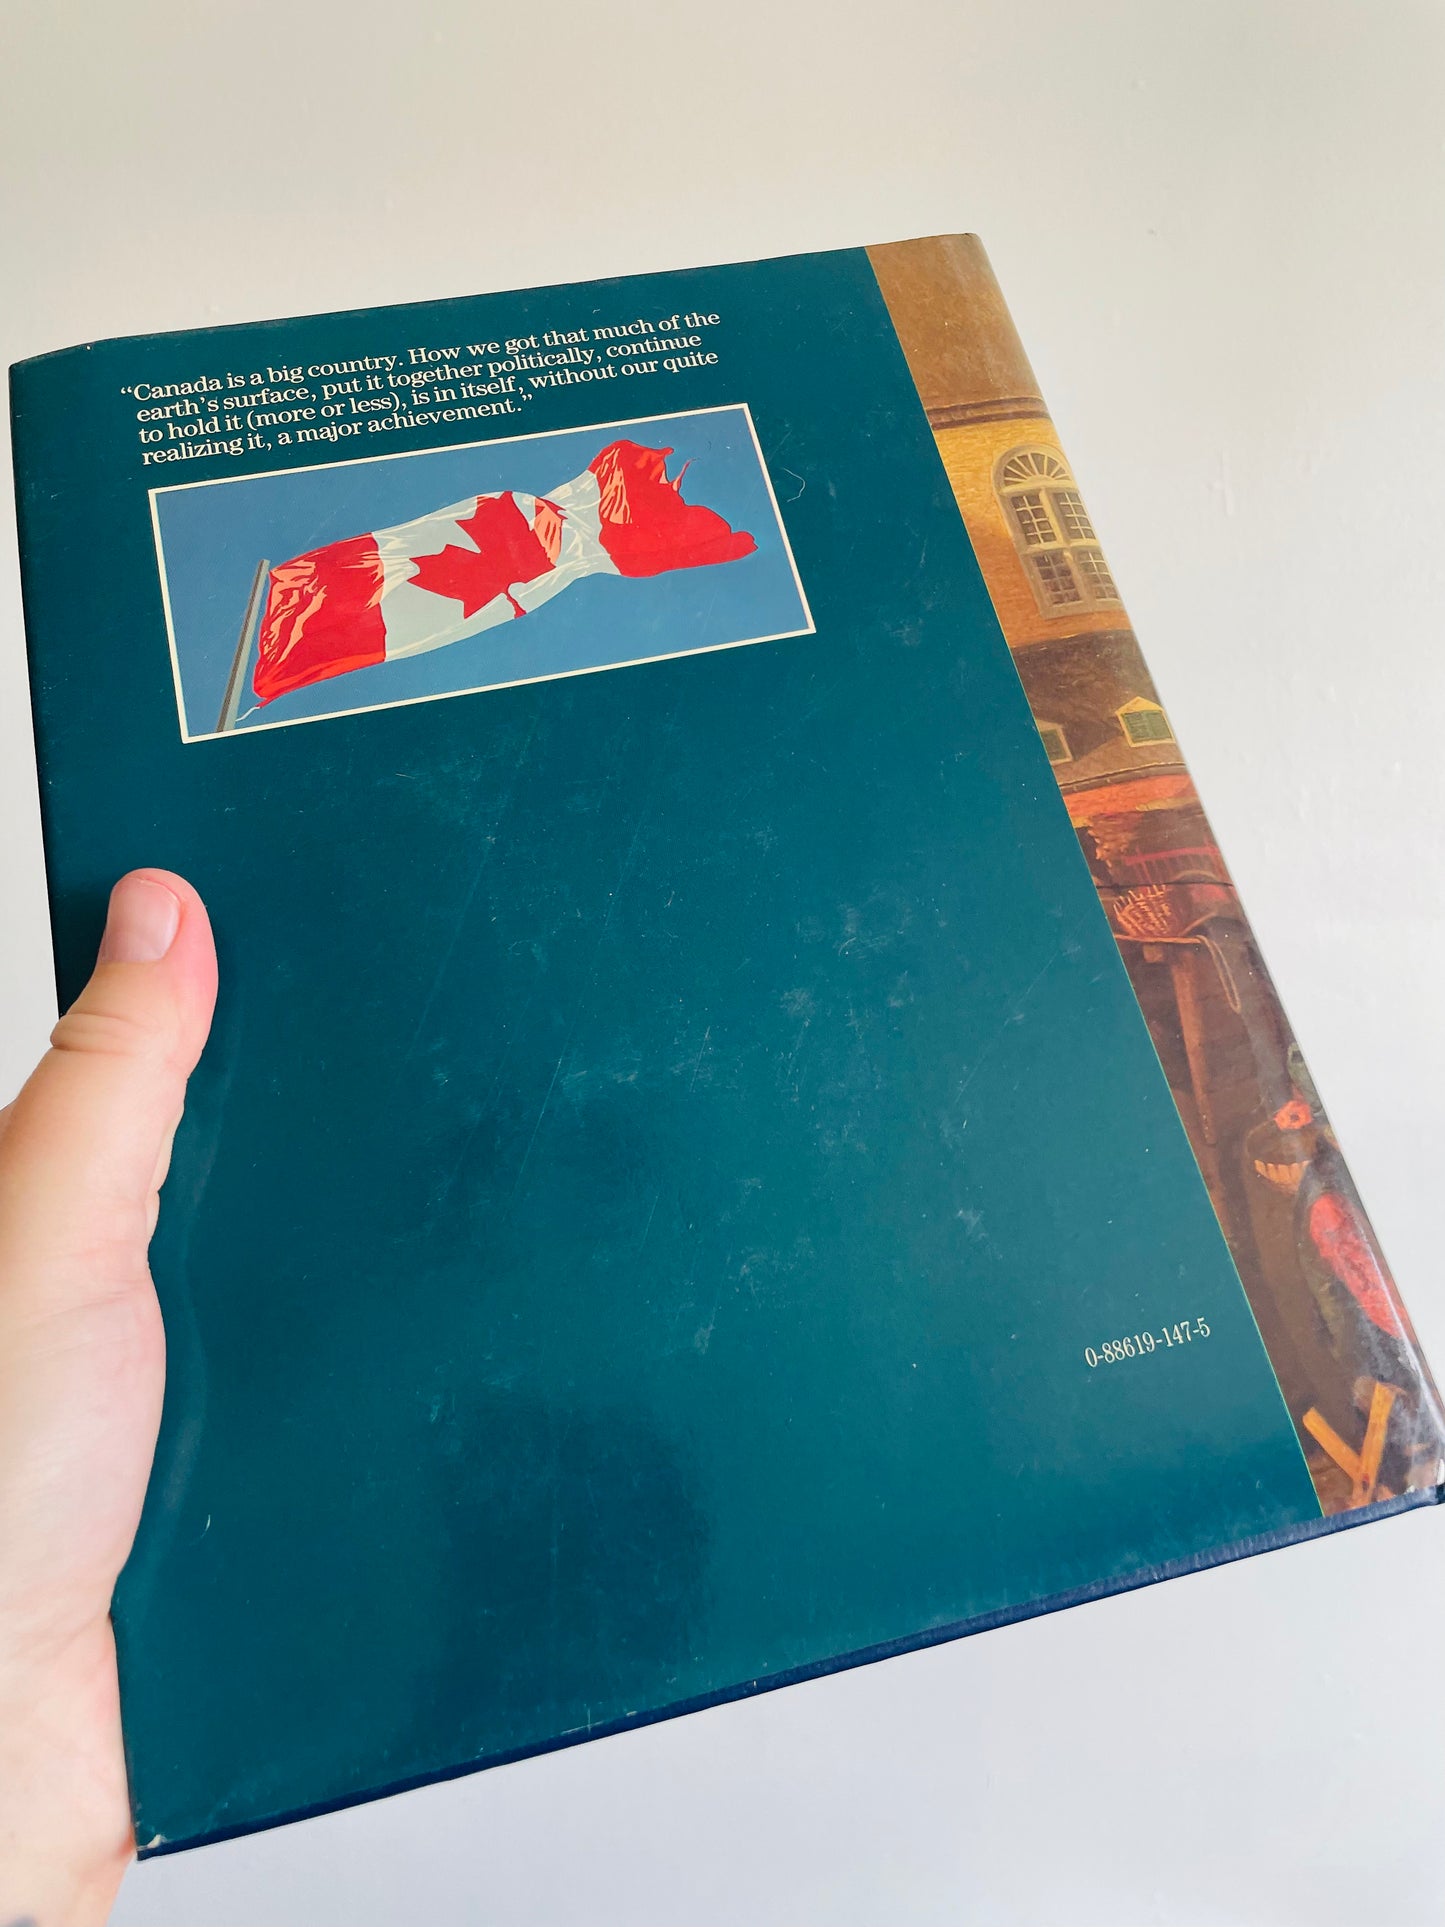 The Illustrated History of Canada Hardcover Book Edited by Craig Brown (1987)